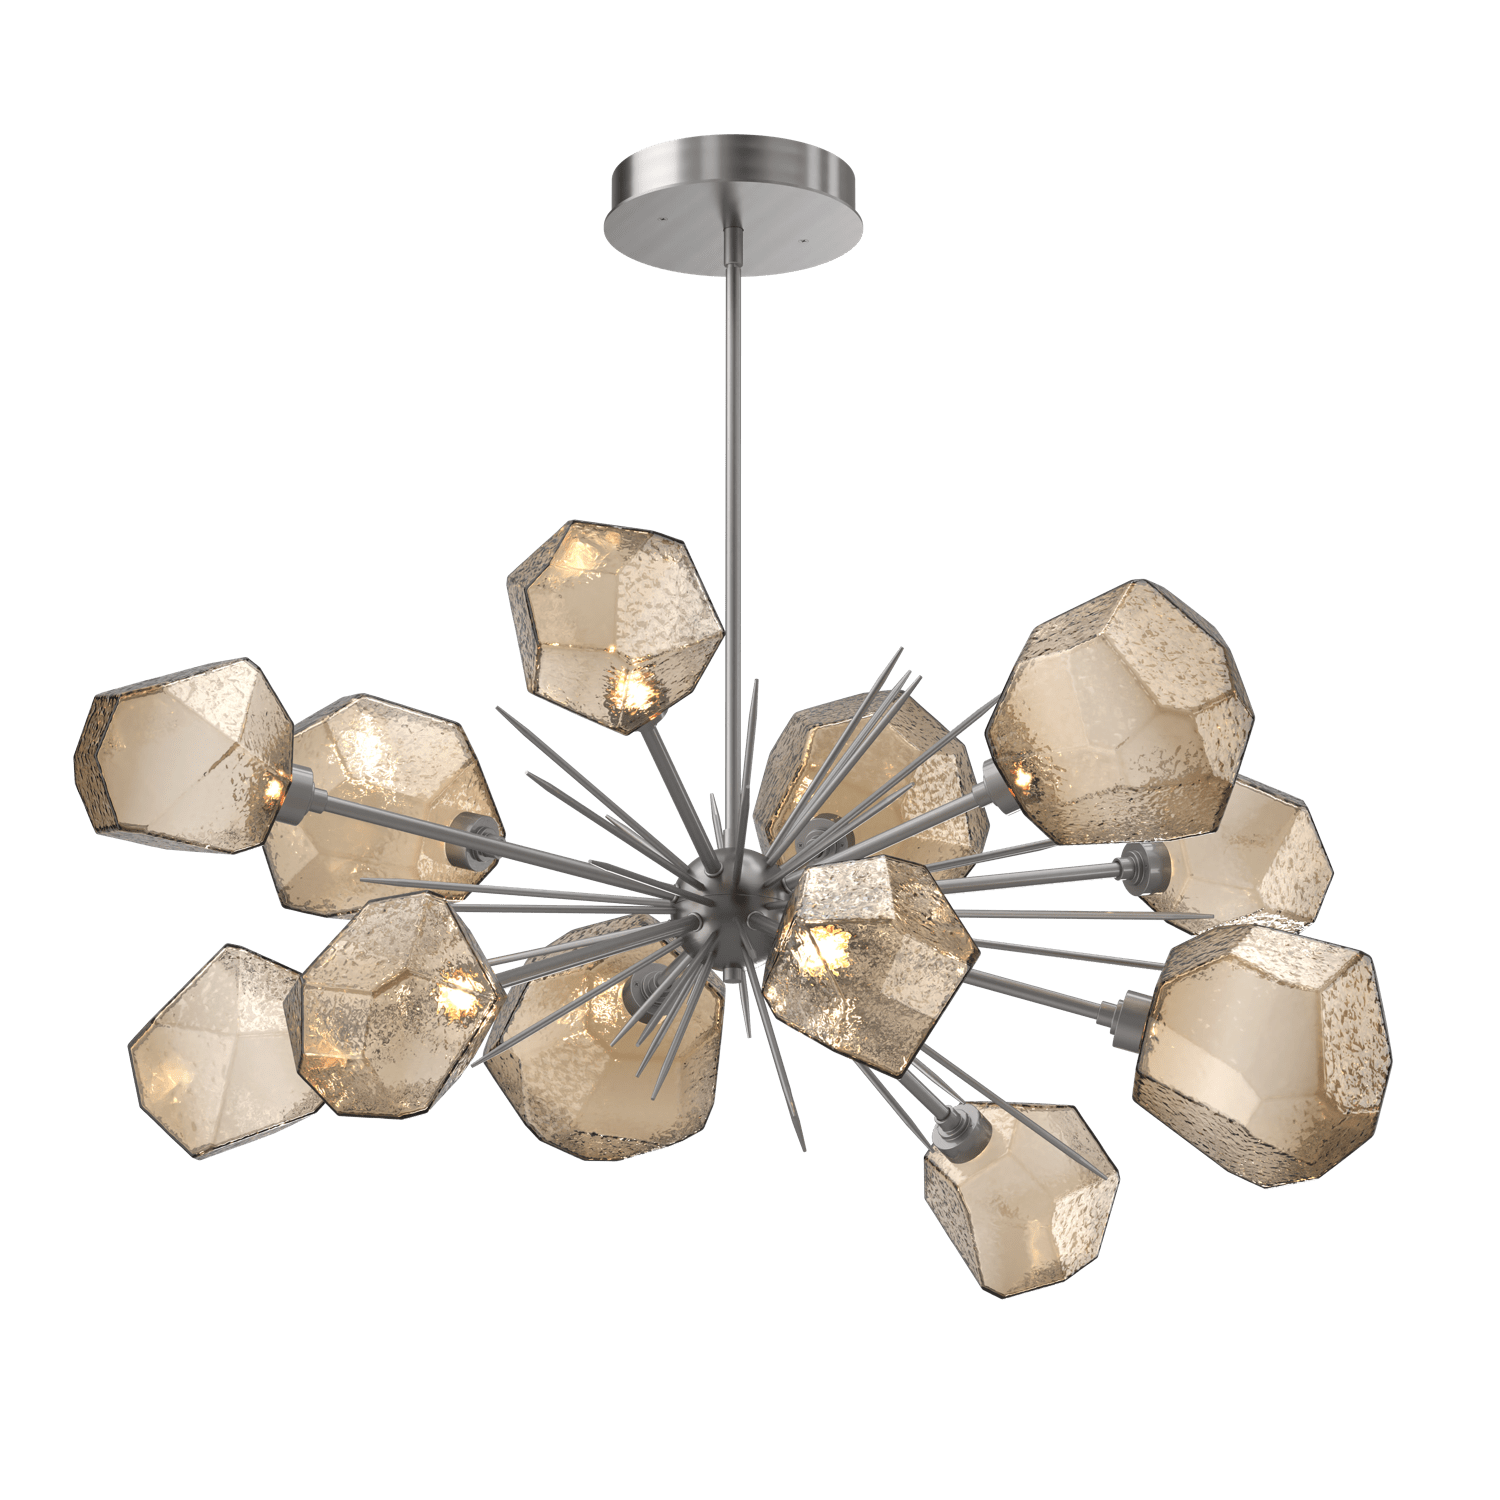 PLB0039-0D-SN-B-Hammerton-Studio-Gem-43-inch-oval-starburst-chandelier-with-satin-nickel-finish-and-bronze-blown-glass-shades-and-LED-lamping